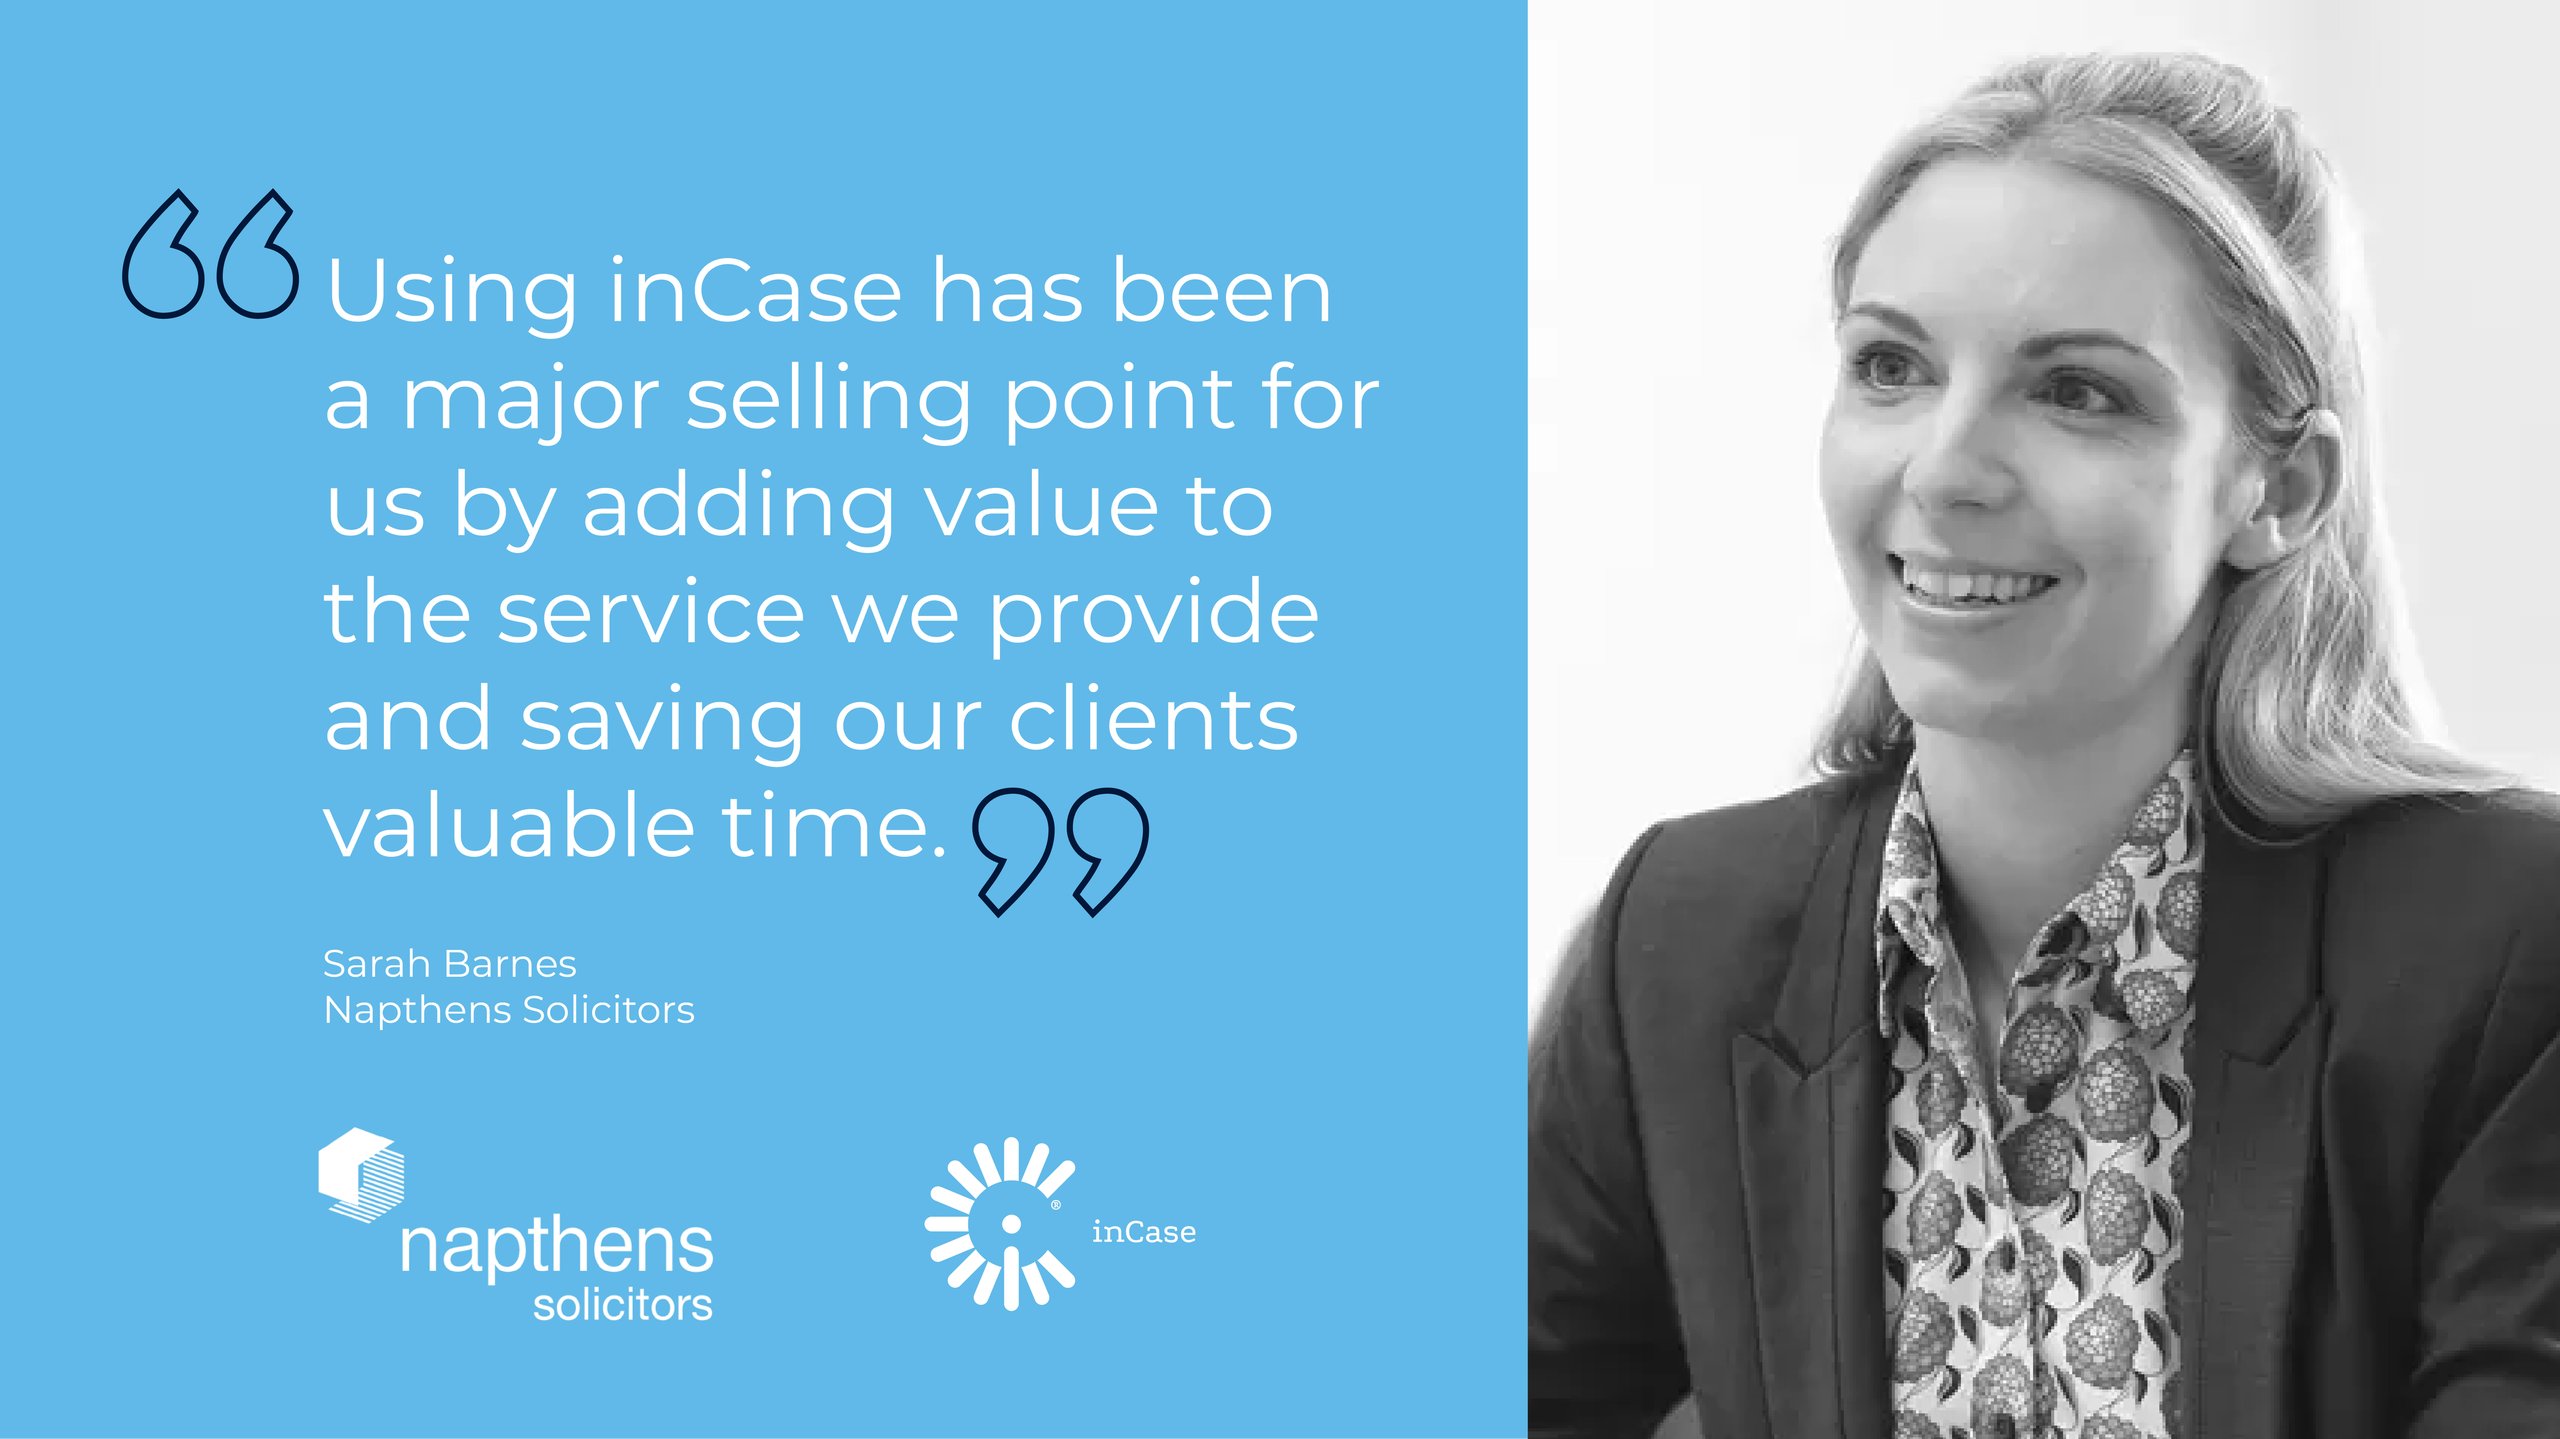 Sarah Barnes of Napthens Solicitors - Using inCase has been a major selling point for us by adding value to the service we provide and saving our clients valuable time. 